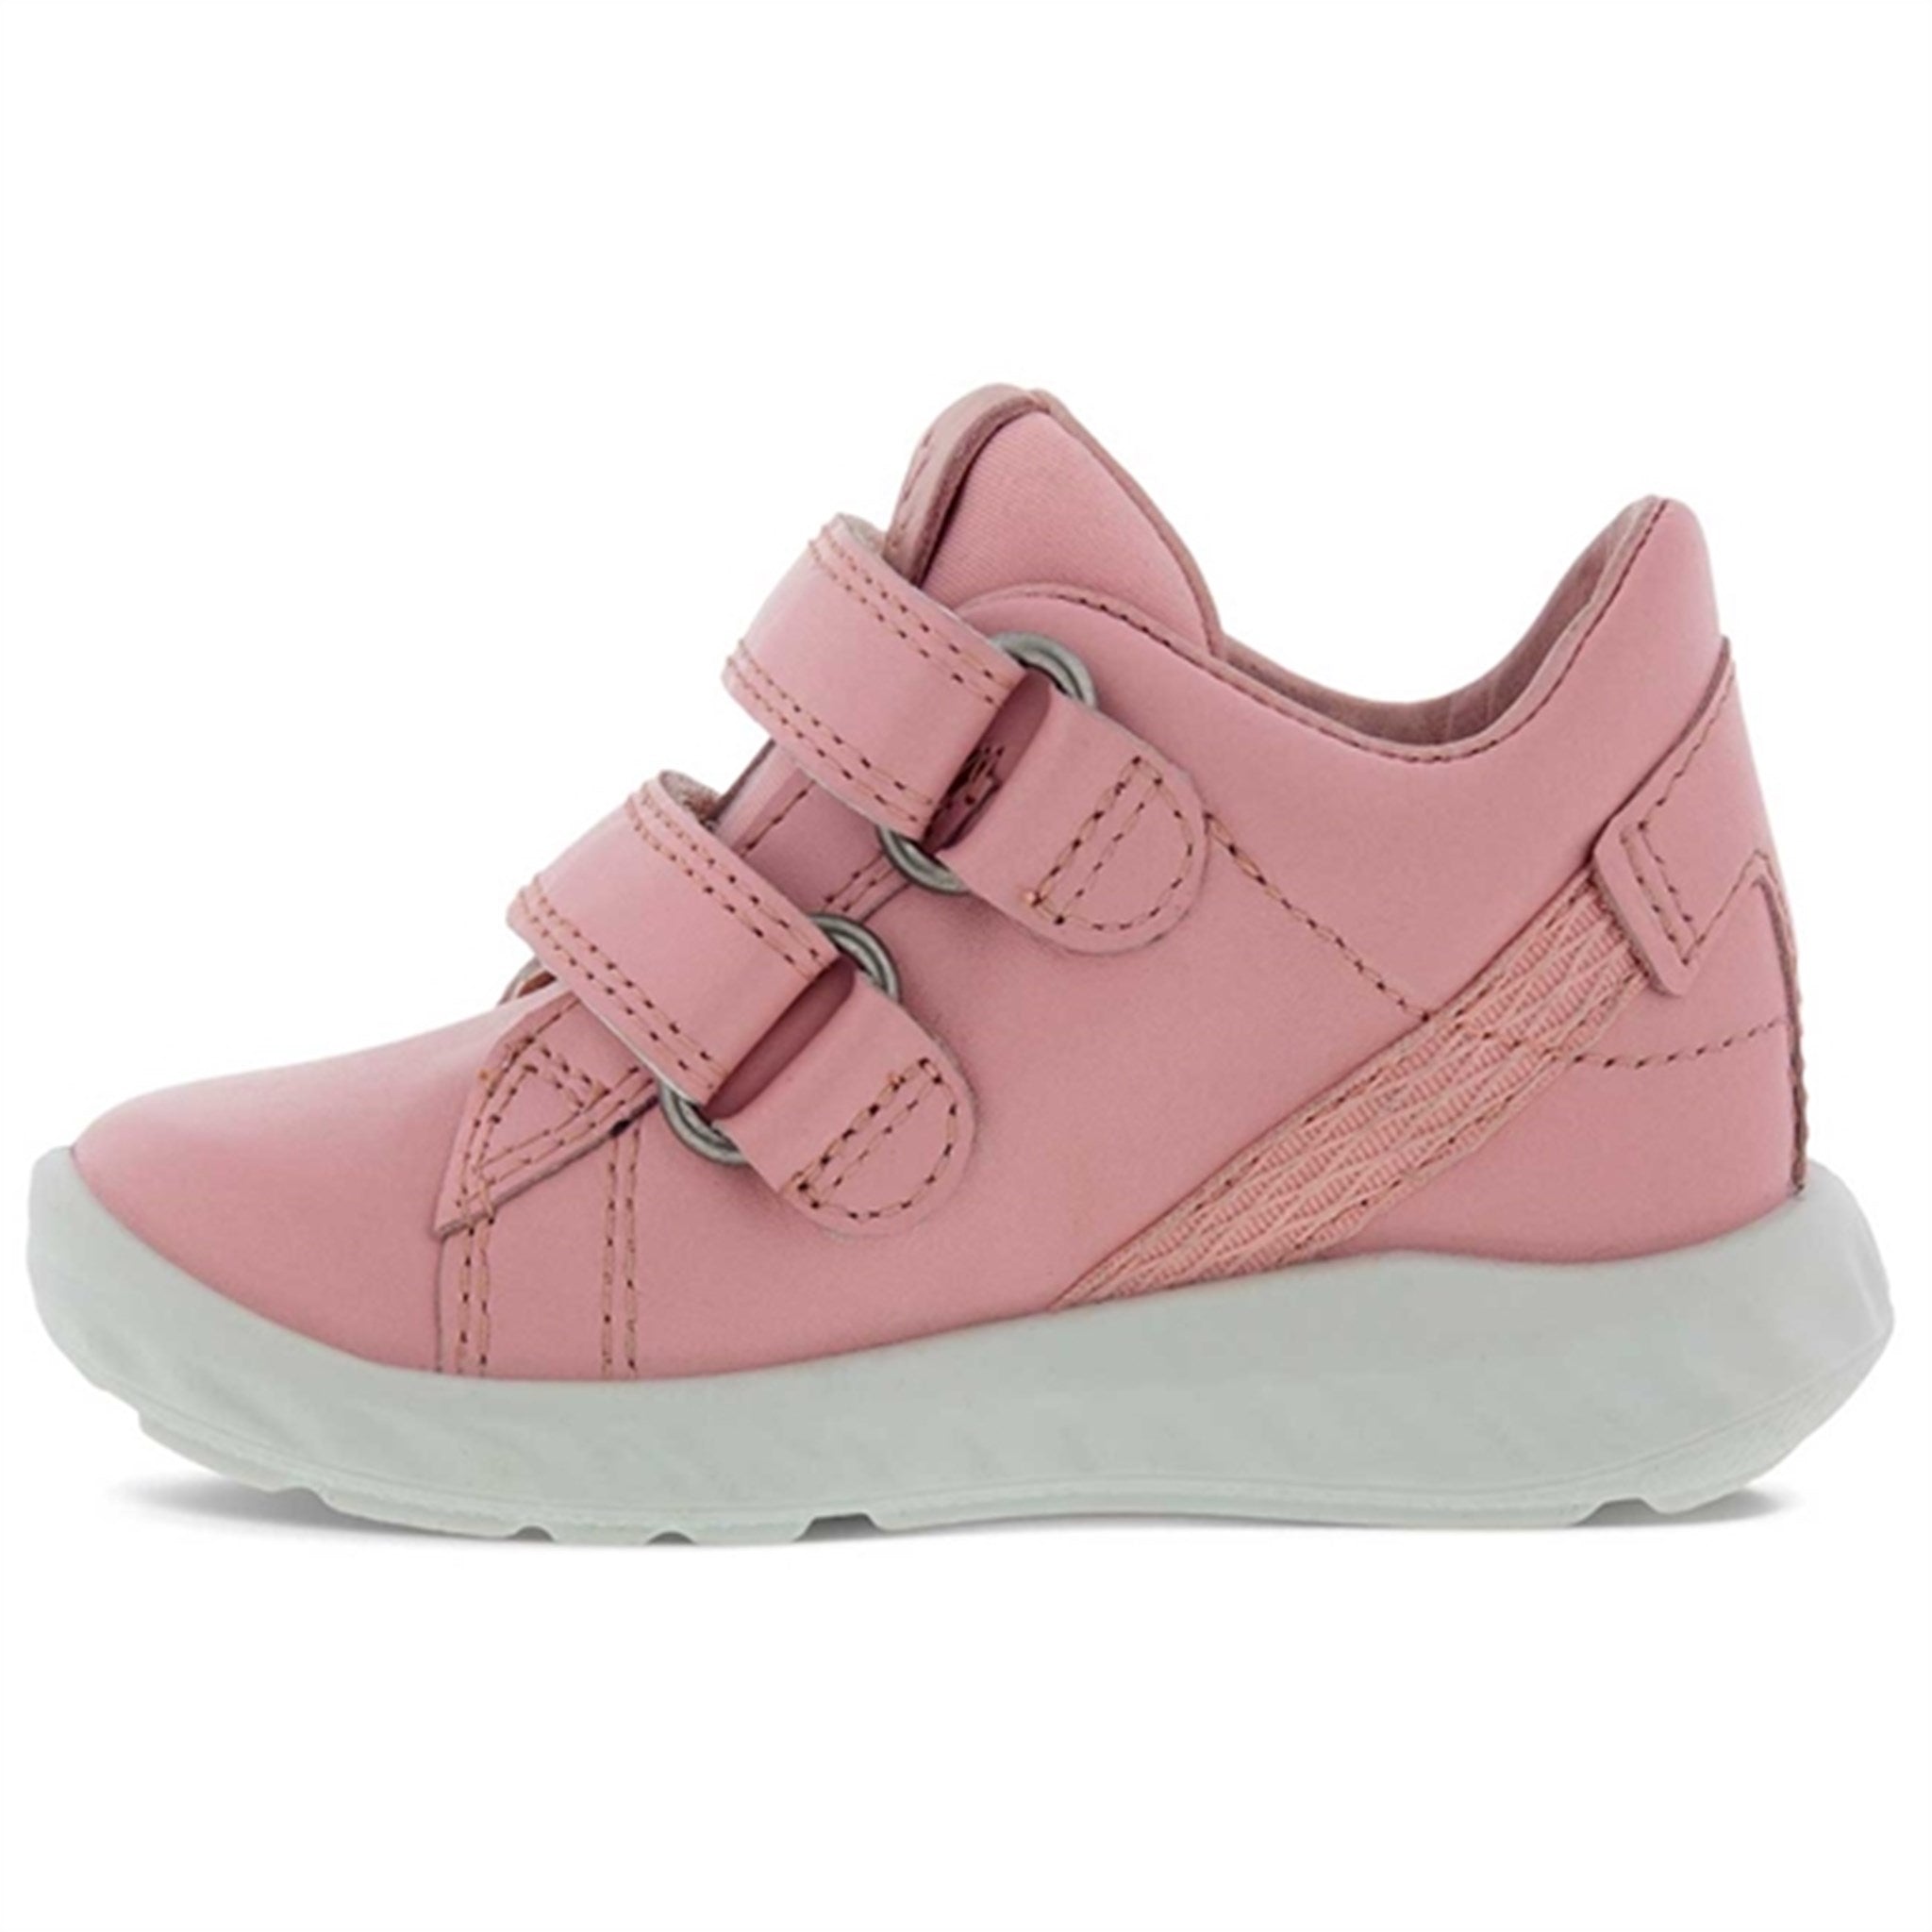 Ecco Lite Infant Silver Pink Shoes 2